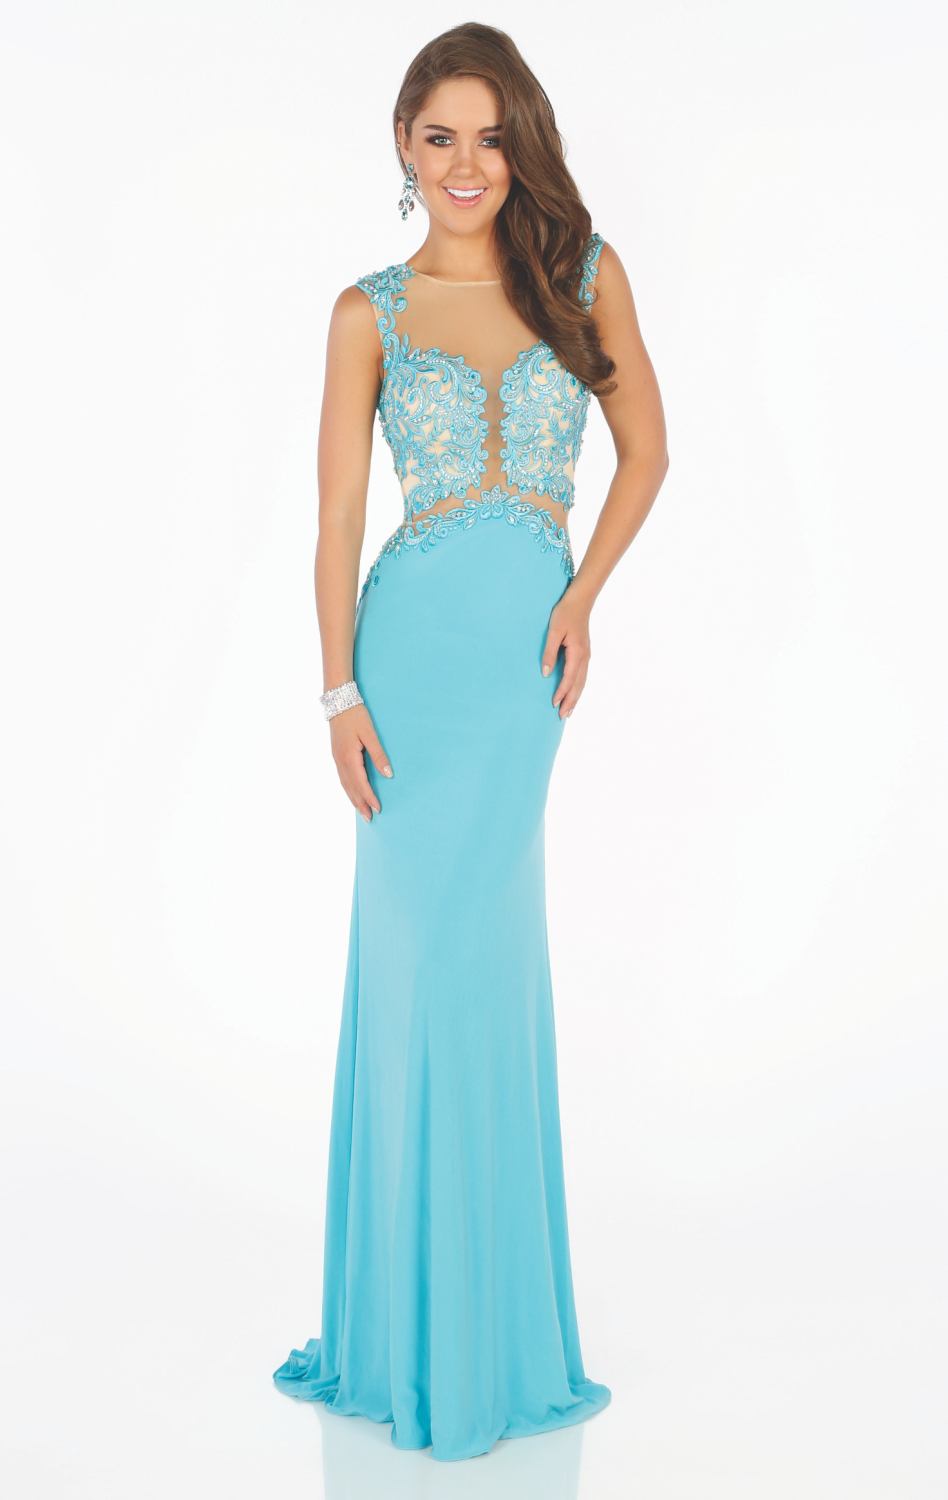 20 Gorgeous Prom Gowns Ideas for Your Big Night